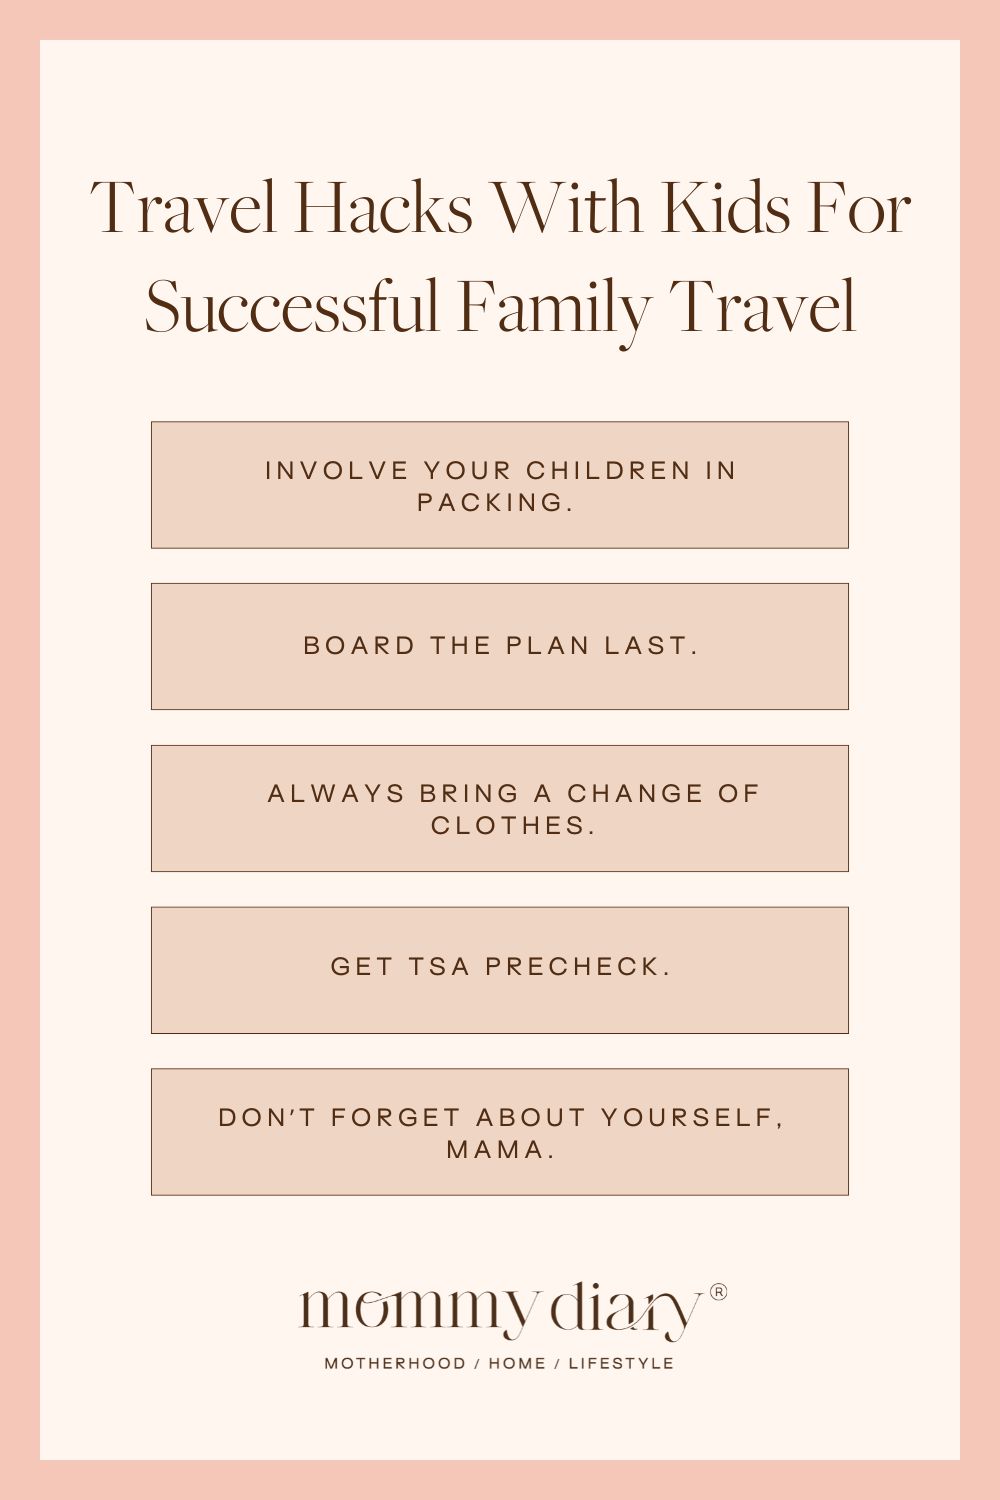 travel hacks with kids for successful family travel